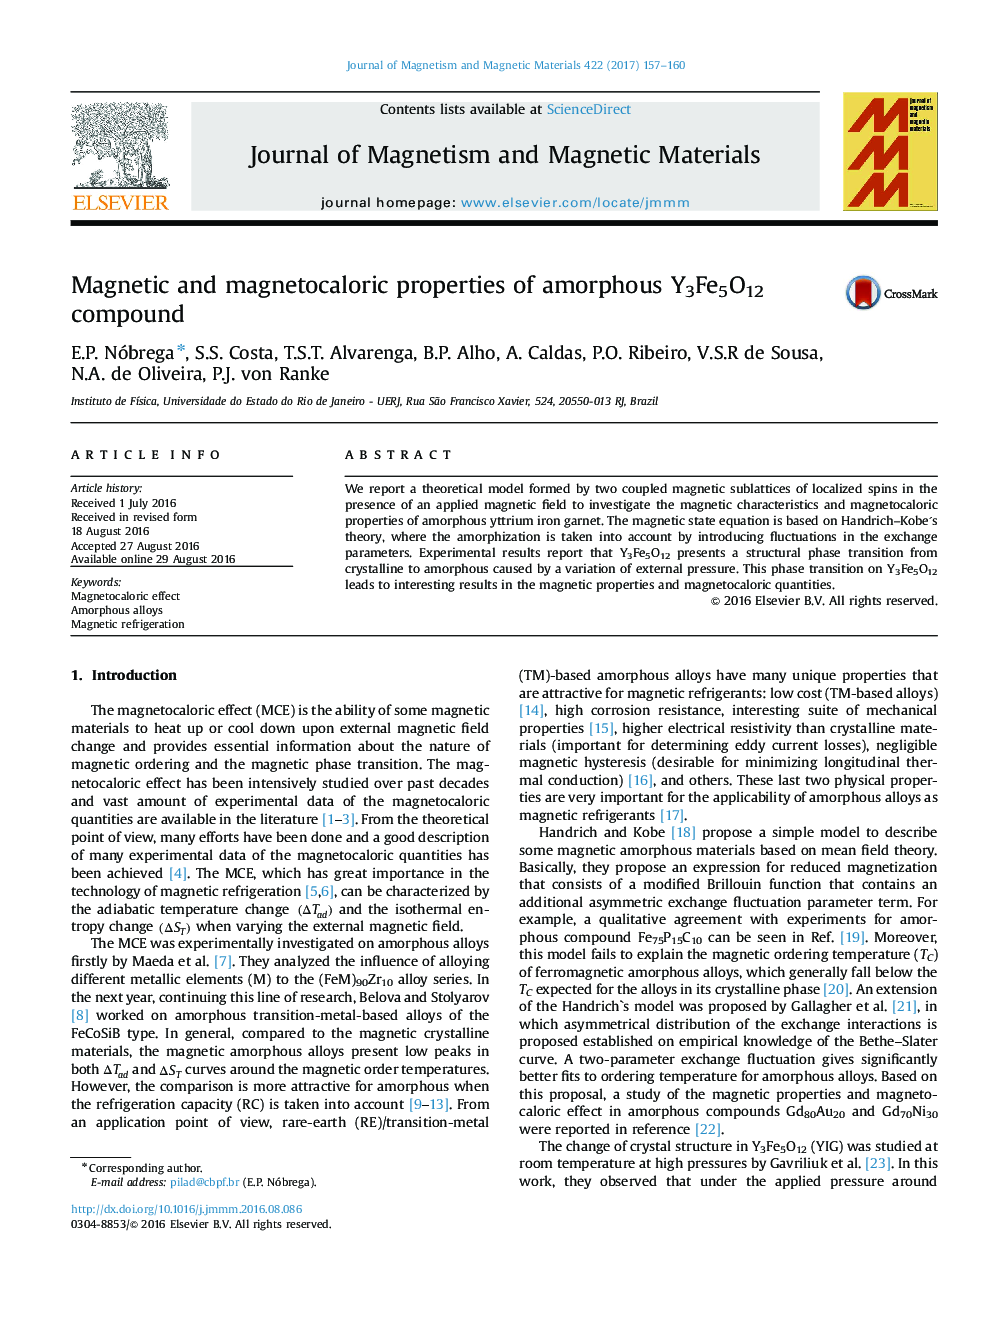 Magnetic and magnetocaloric properties of amorphous Y3Fe5O12 compound